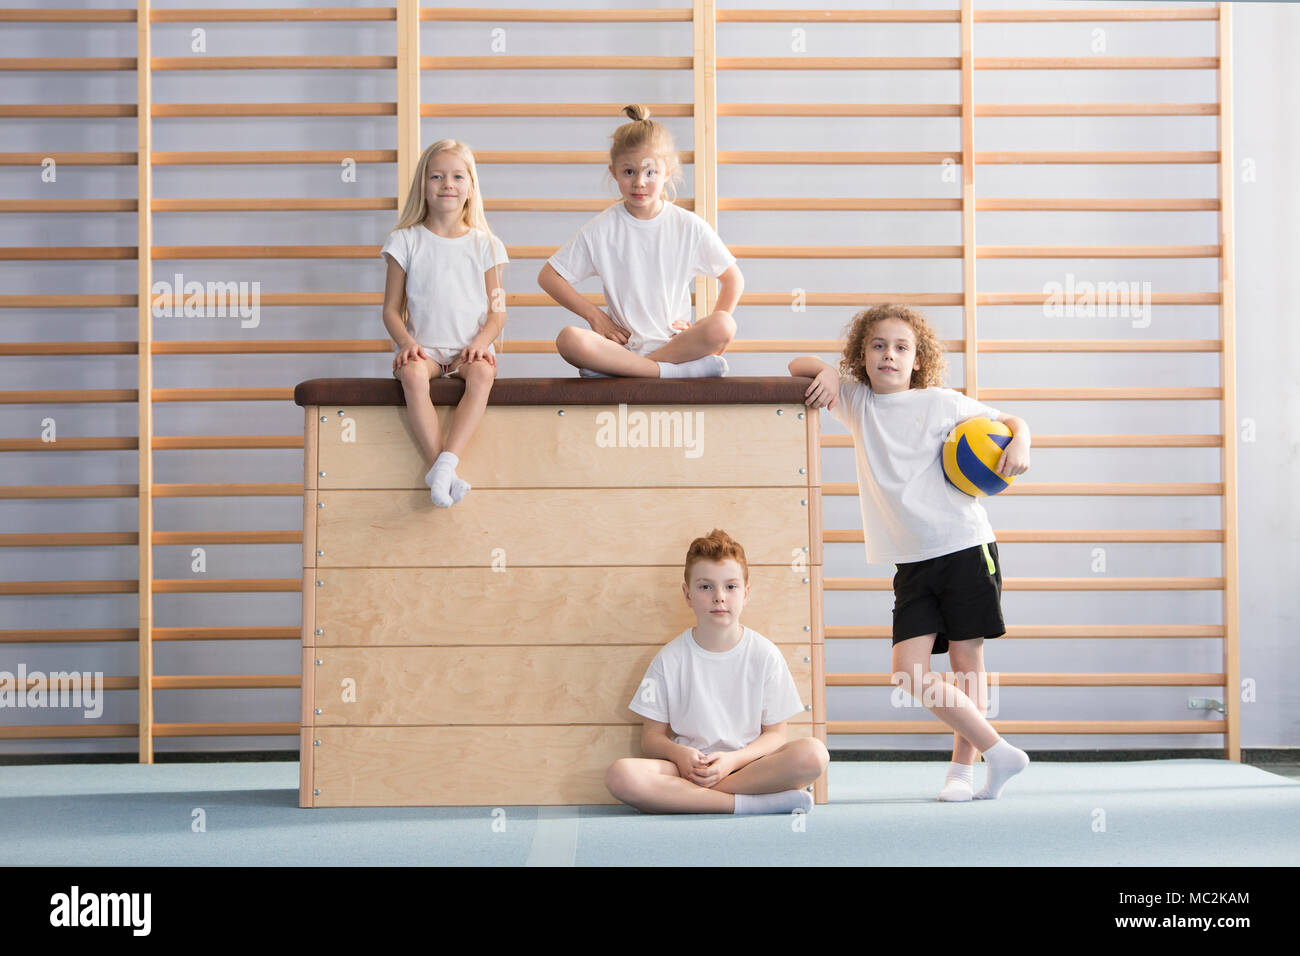 Boy with a ball next to a wooden vaulting box on which smiling children are sitting in the gym hall Stock Photo